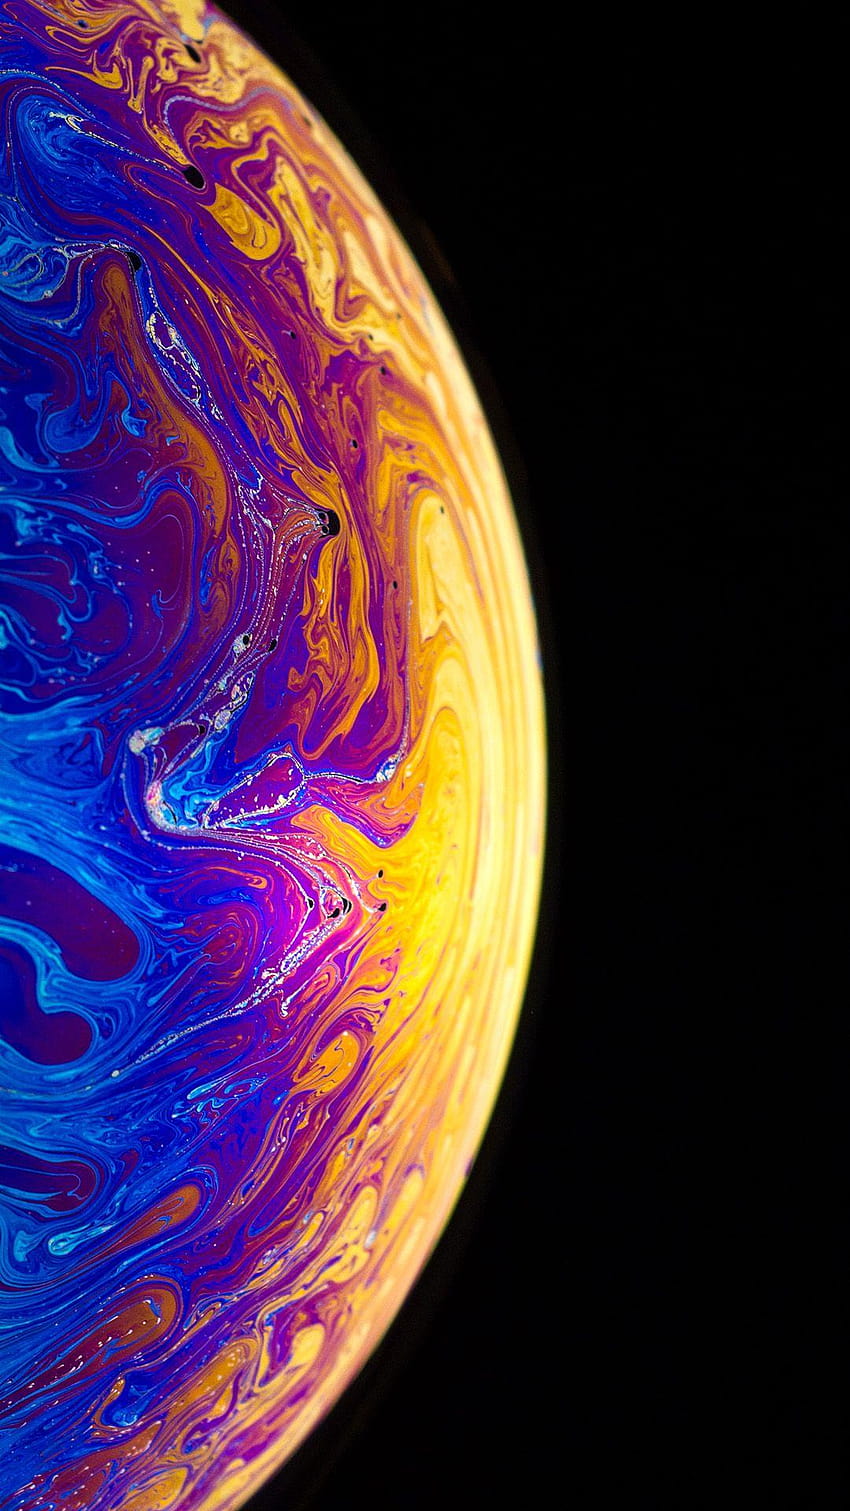 New Live for Xs! in 2019, iphone x half planet HD phone wallpaper